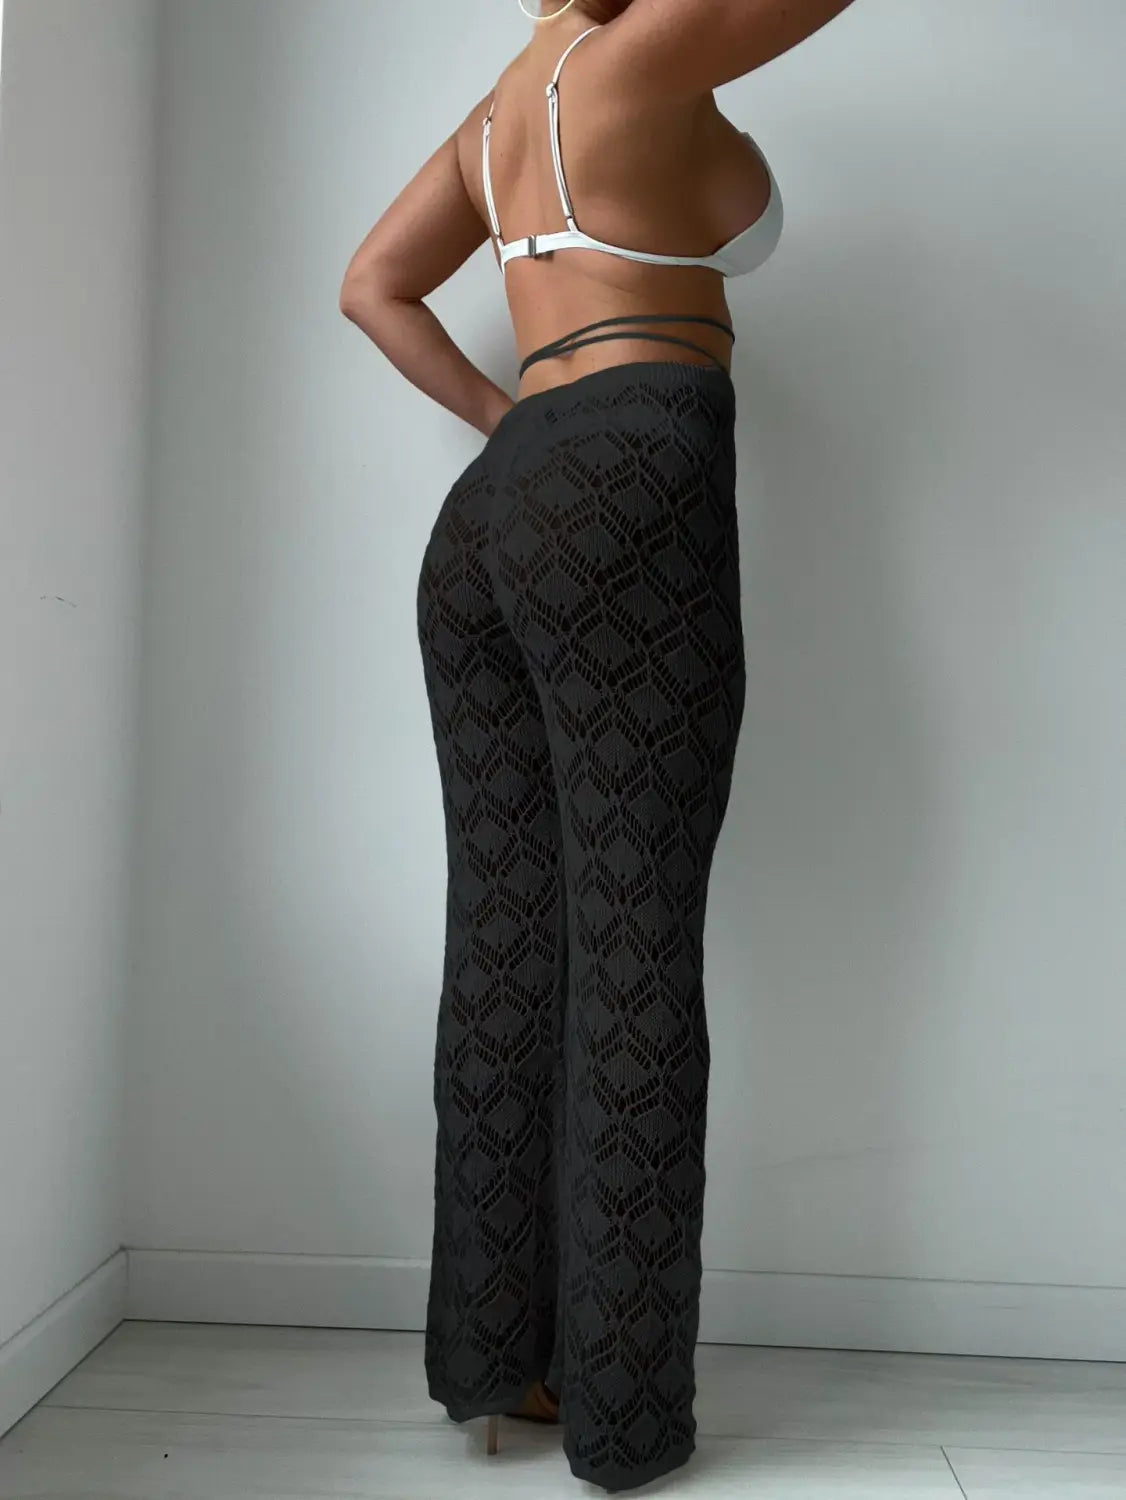 Bohemian Bliss Hollow Out Trousers - Your Beachside Statement